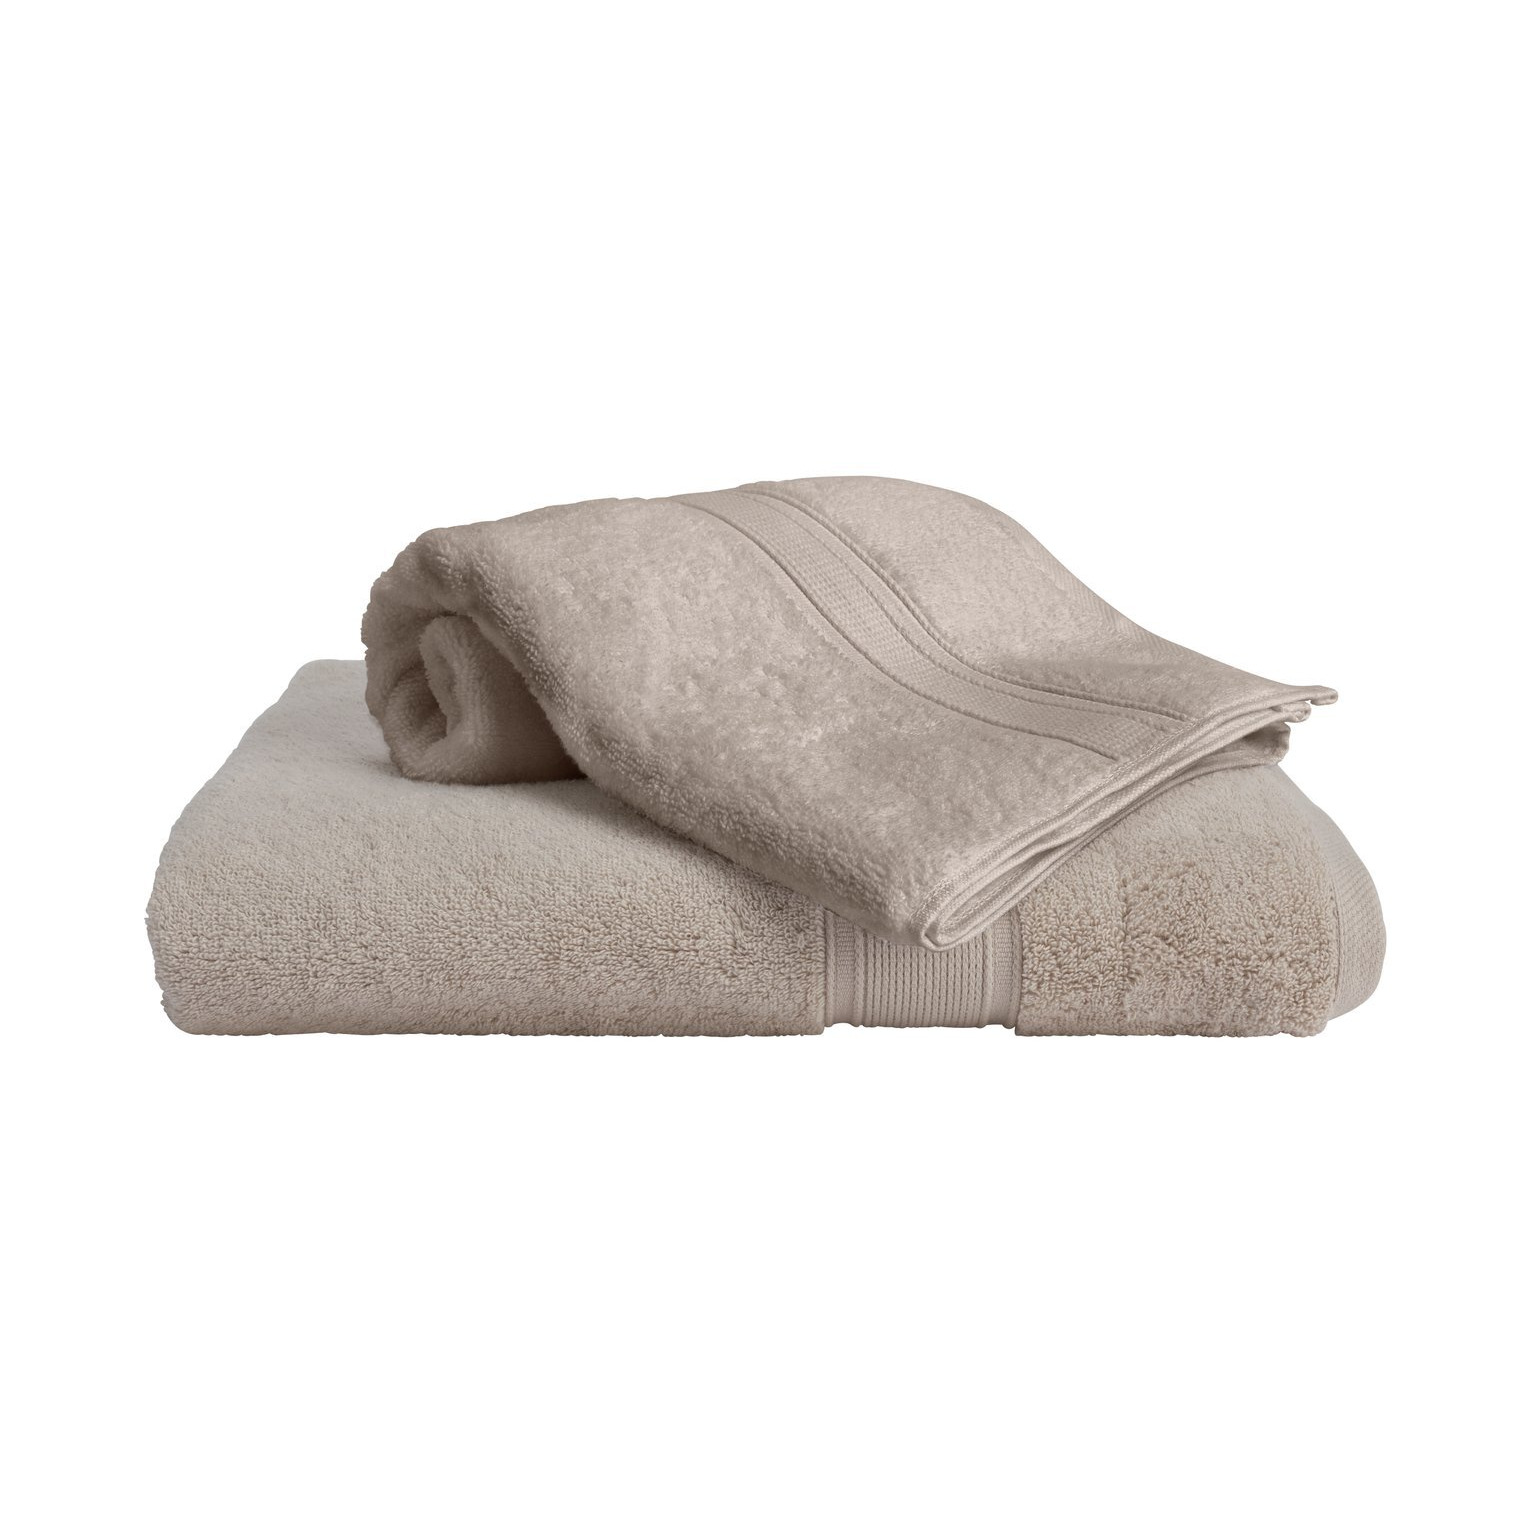 Habitat Cotton Supersoft 2 Pack Hand Towel - Oatmeal - image 1